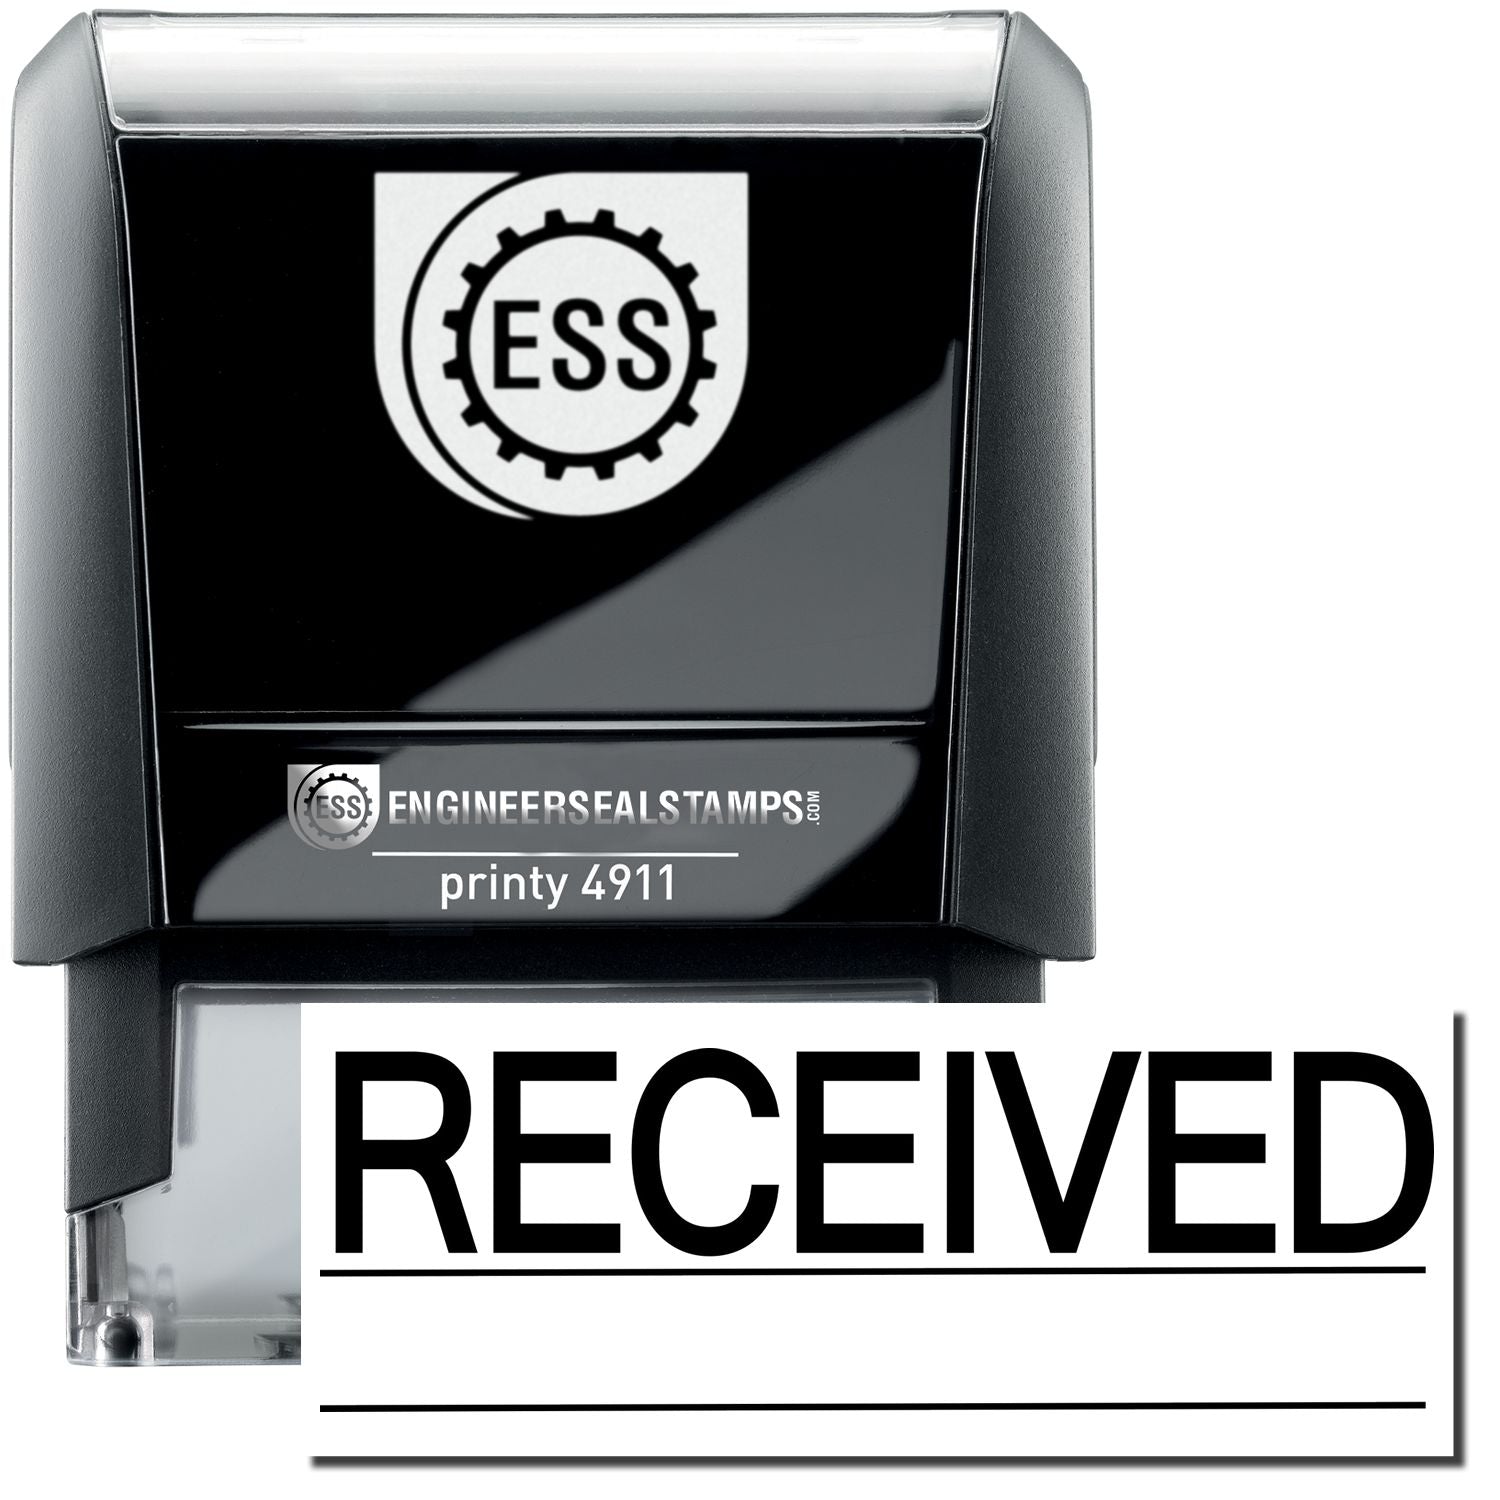 A self-inking stamp with a stamped image showing how the text "RECEIVED" with a line underneath the text is displayed after stamping.